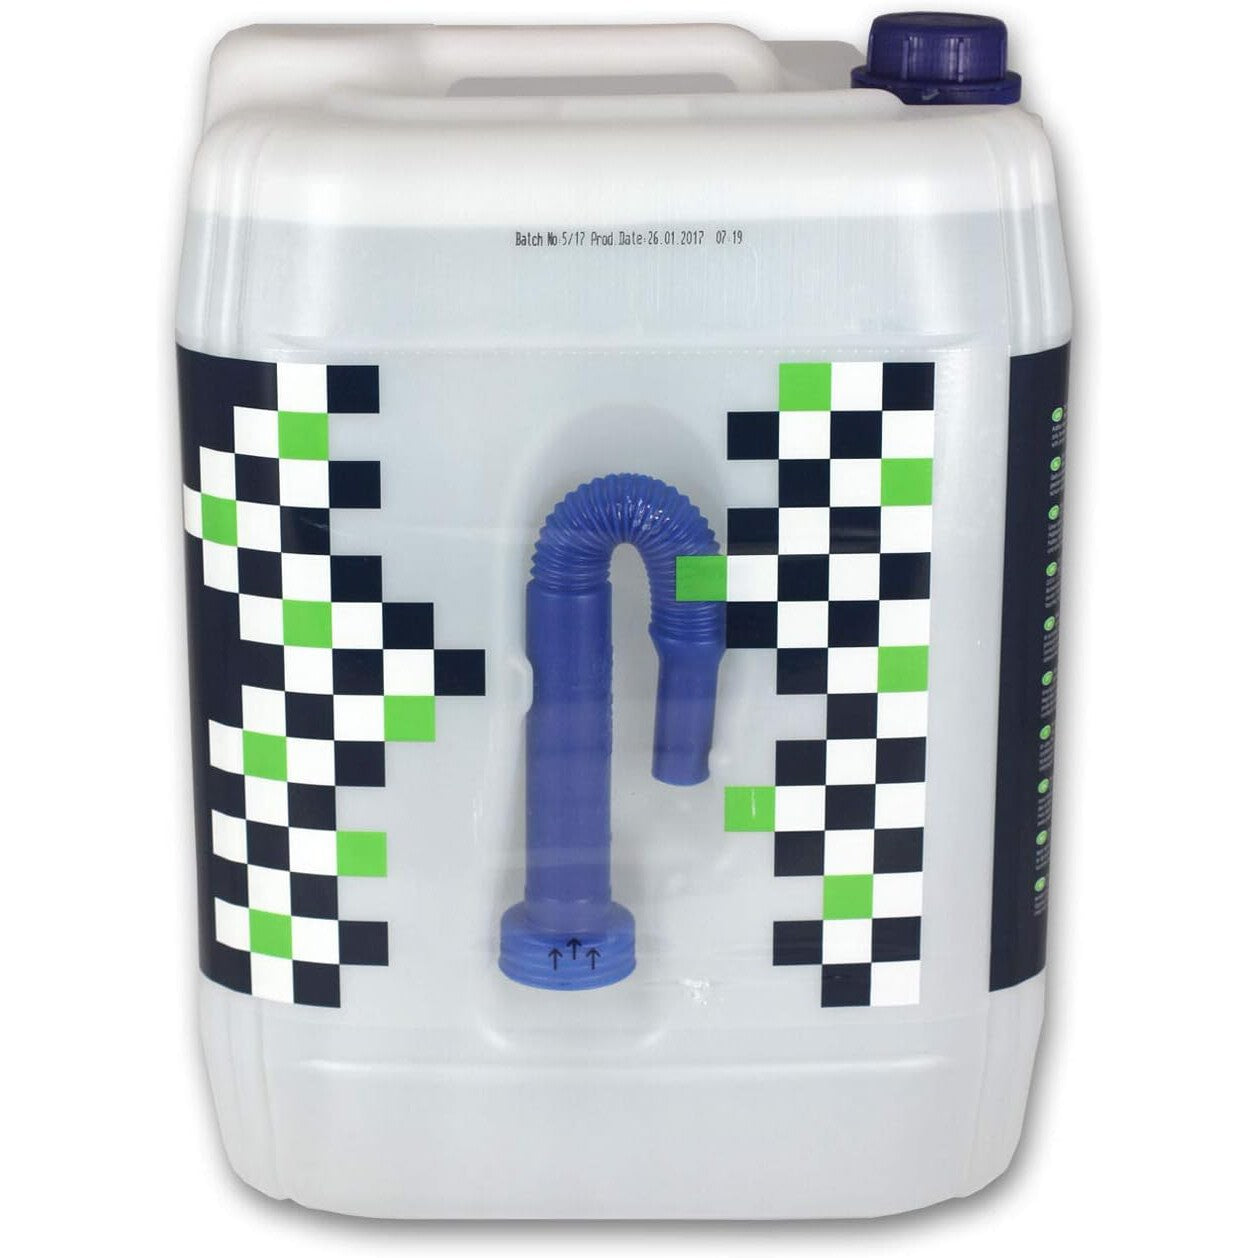 Greenchem AdBlue Universal Cars & Vans AdBlue 20 L 20 Litre With Pouring Spout Ad blue 